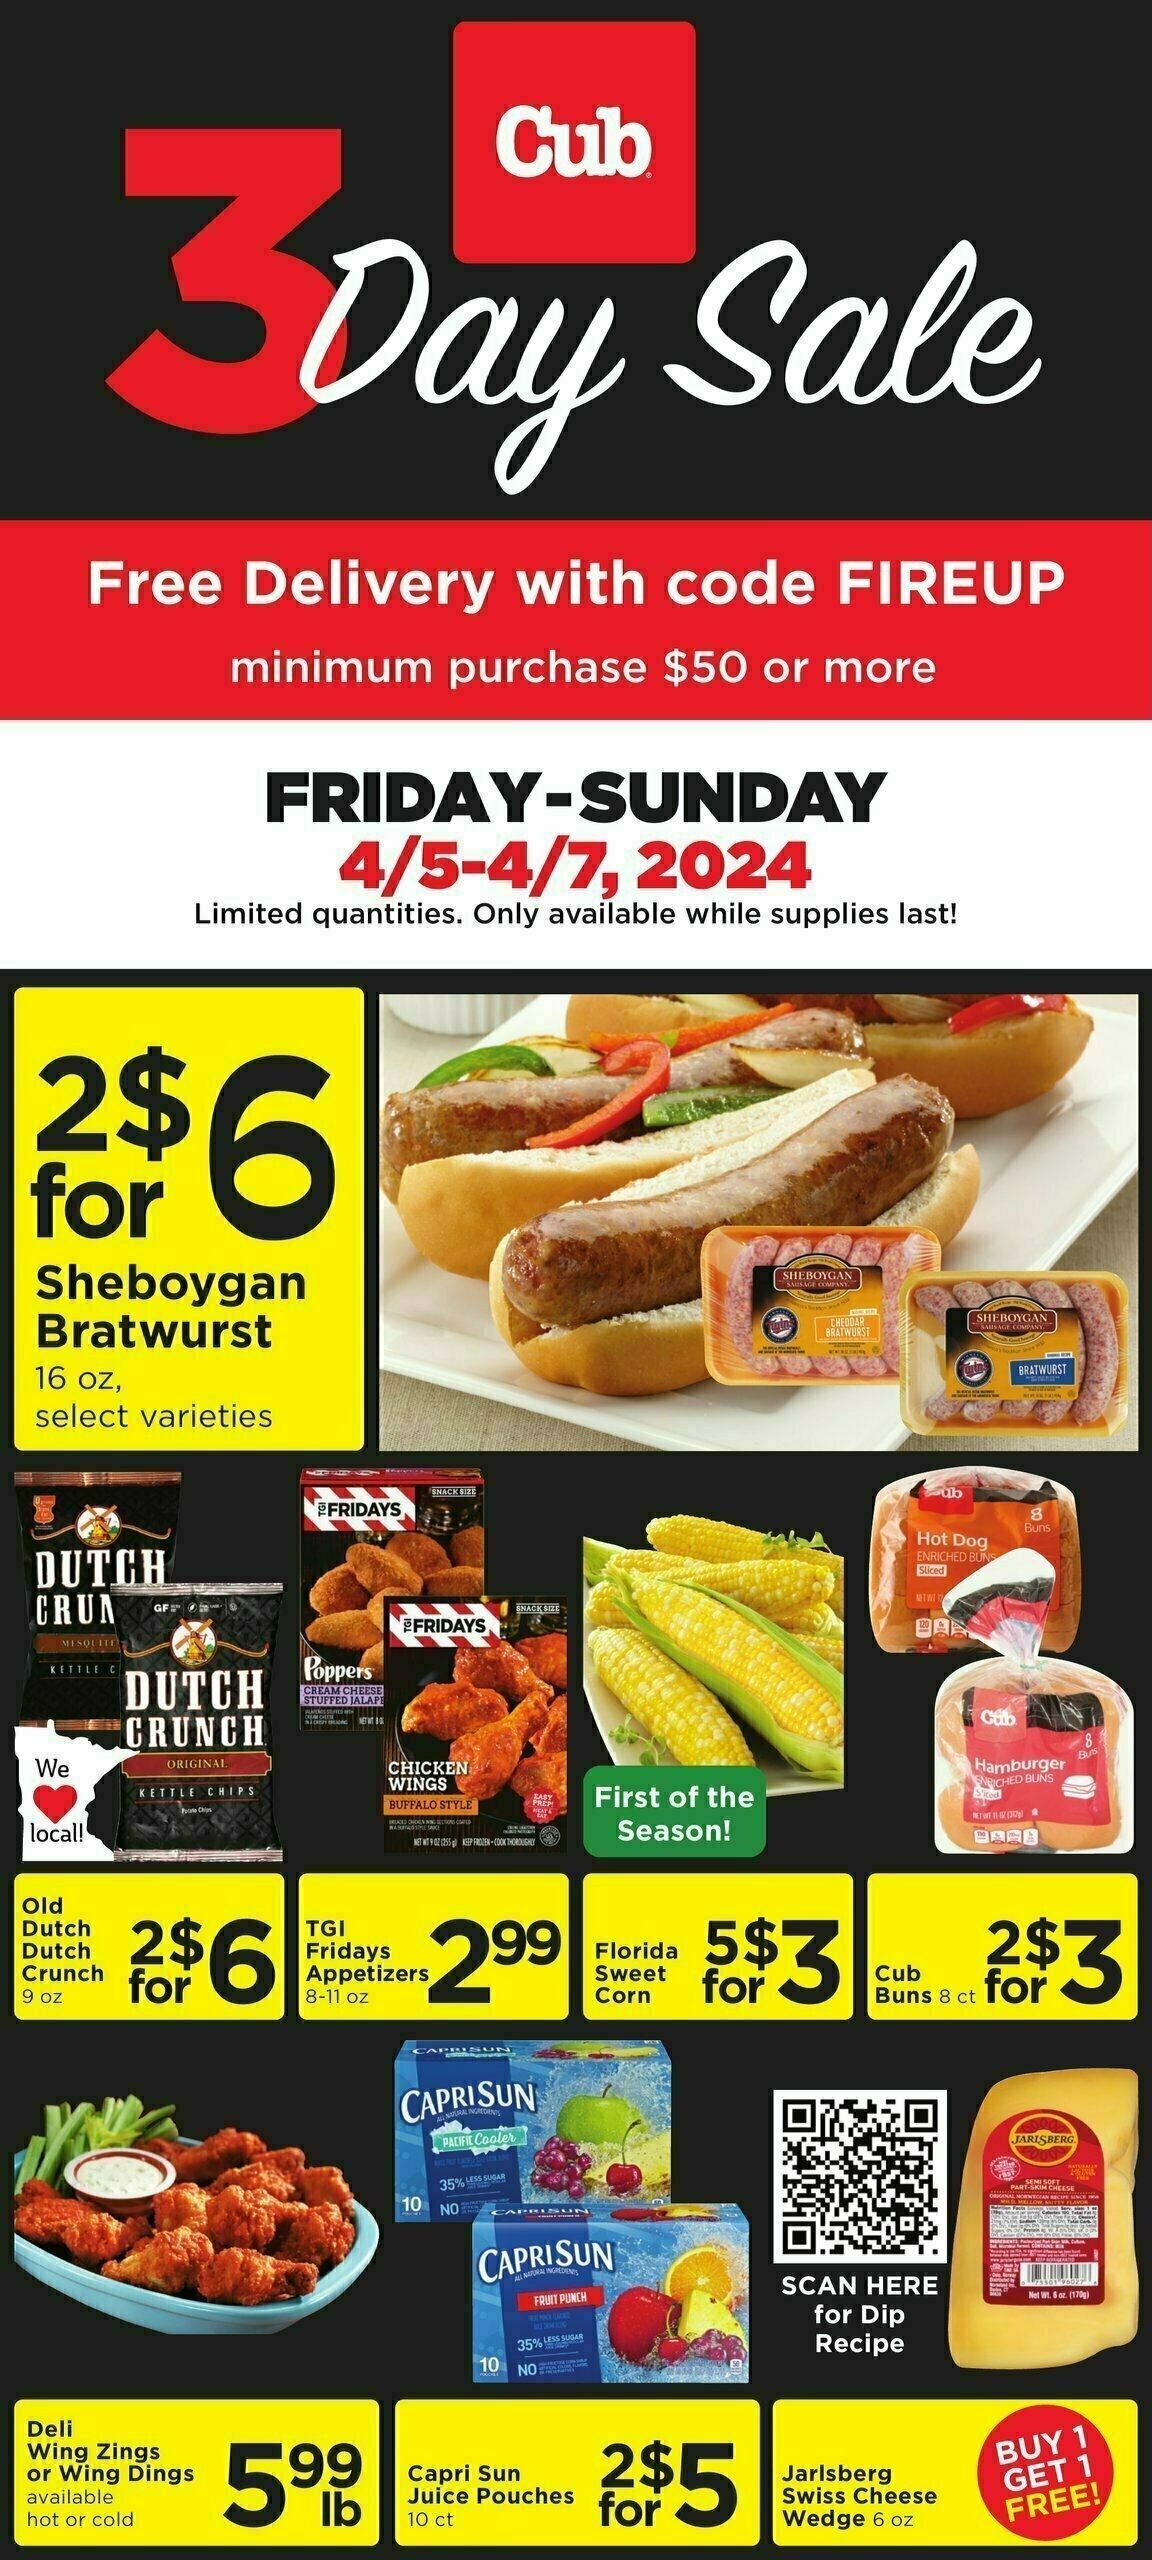 Cub Foods 3 Day Sale Weekly Ad from April 5